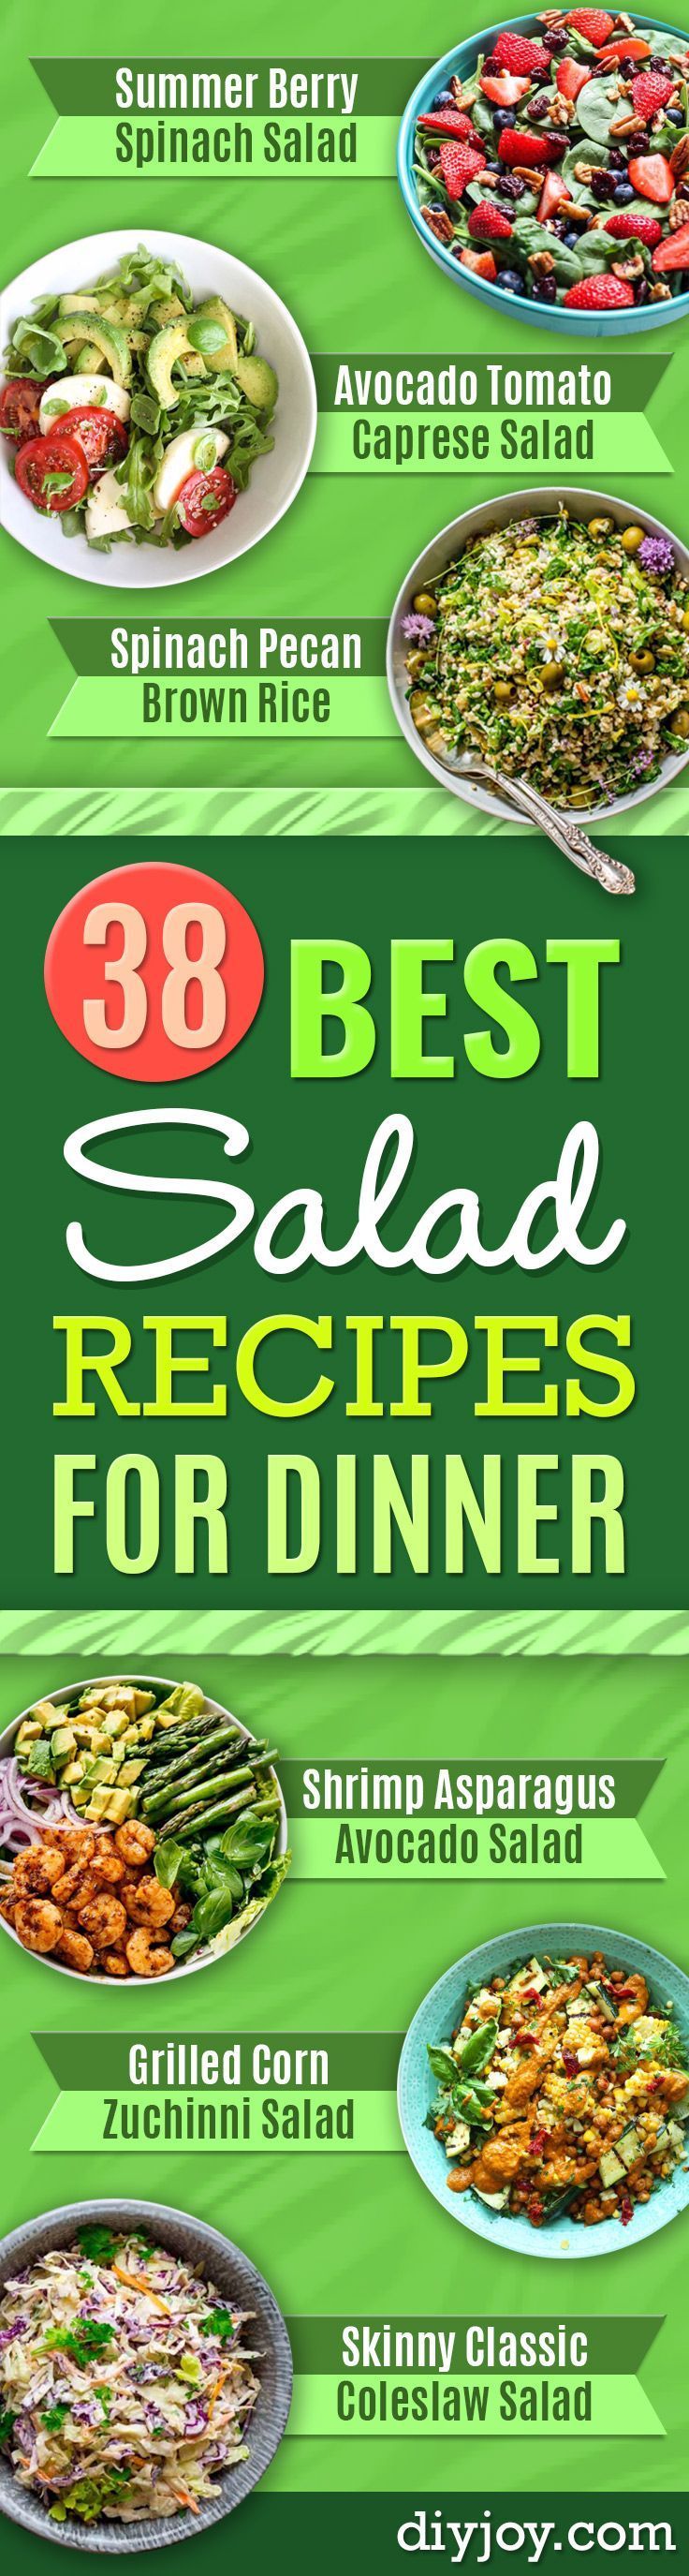 Best Dinner Salad Recipes – Easy Salads to Make for Quick and Healthy Dinners – Healthy Chicken, Egg, Vegetarian, Steak and Shrimp